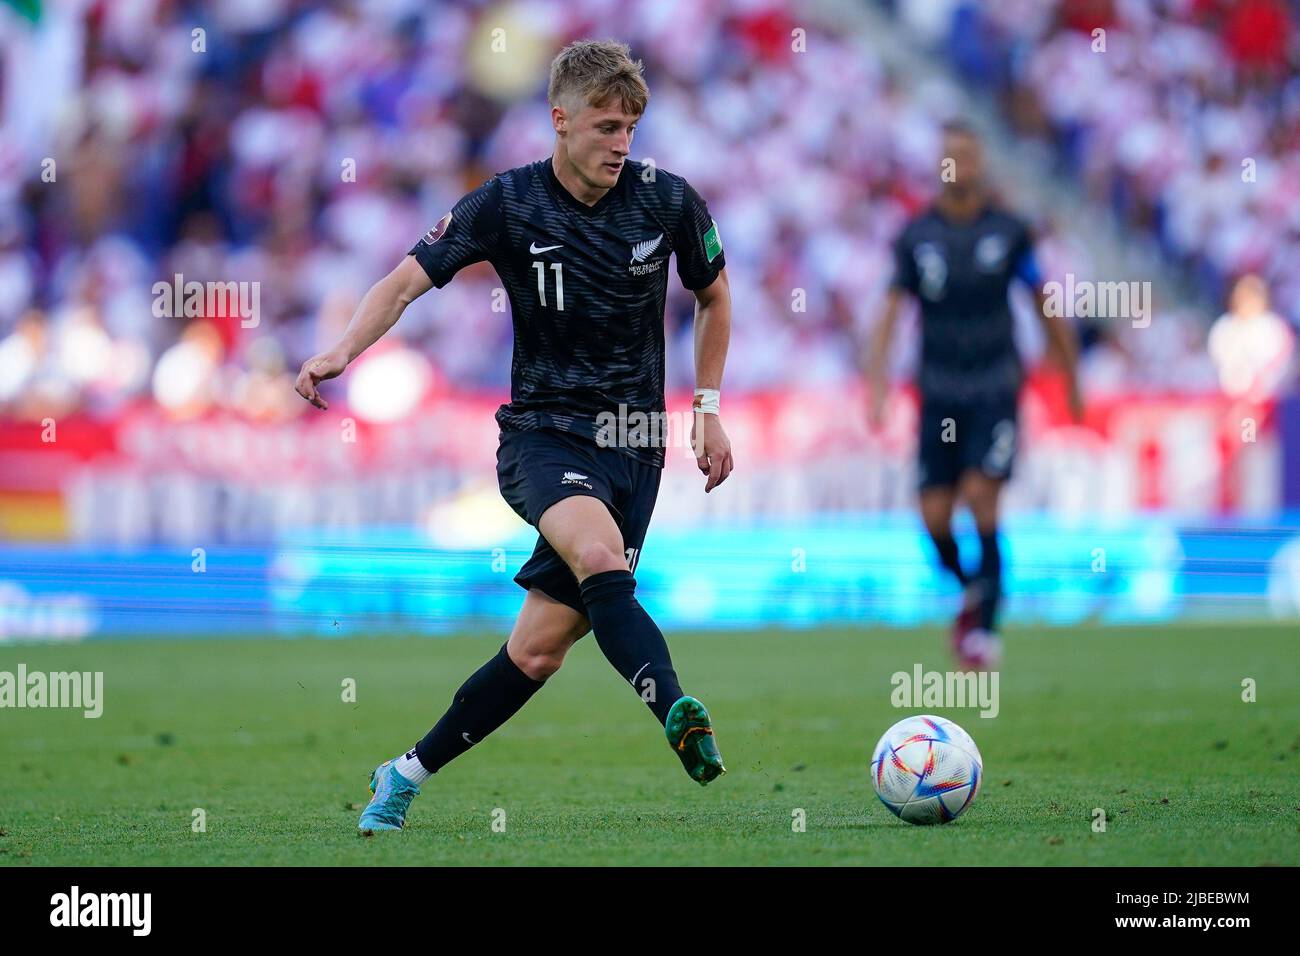 Barcelona, Spain. June 5, 2022, Alex Greive of New Zealand during the friendly match between Peru and New Zealand played at RCDE Stadium on June 5, 2022 in Barcelona, Spain. (Photo by Bagu Blanco / PRESSINPHOTO) Stock Photo